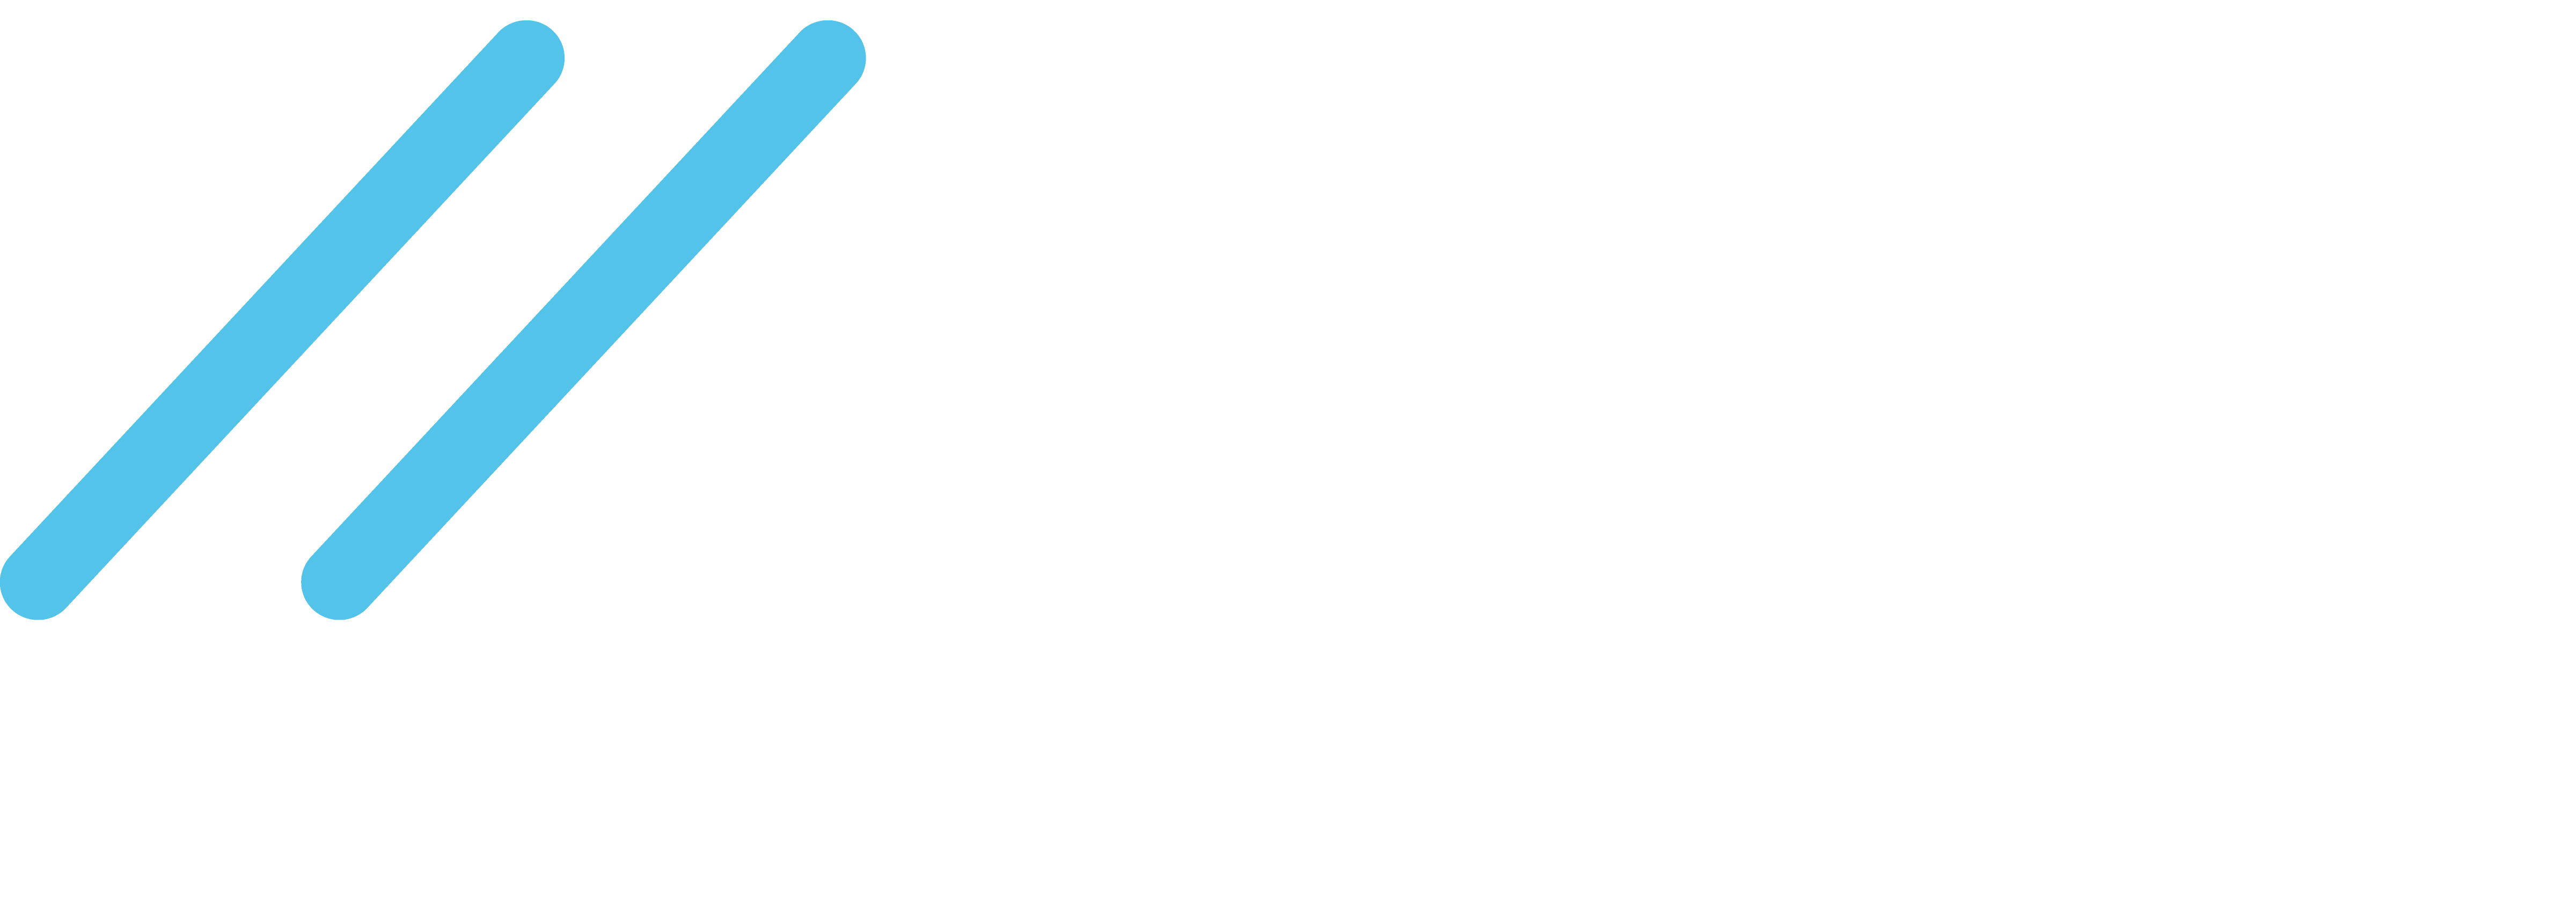 PACE logos and brand information.